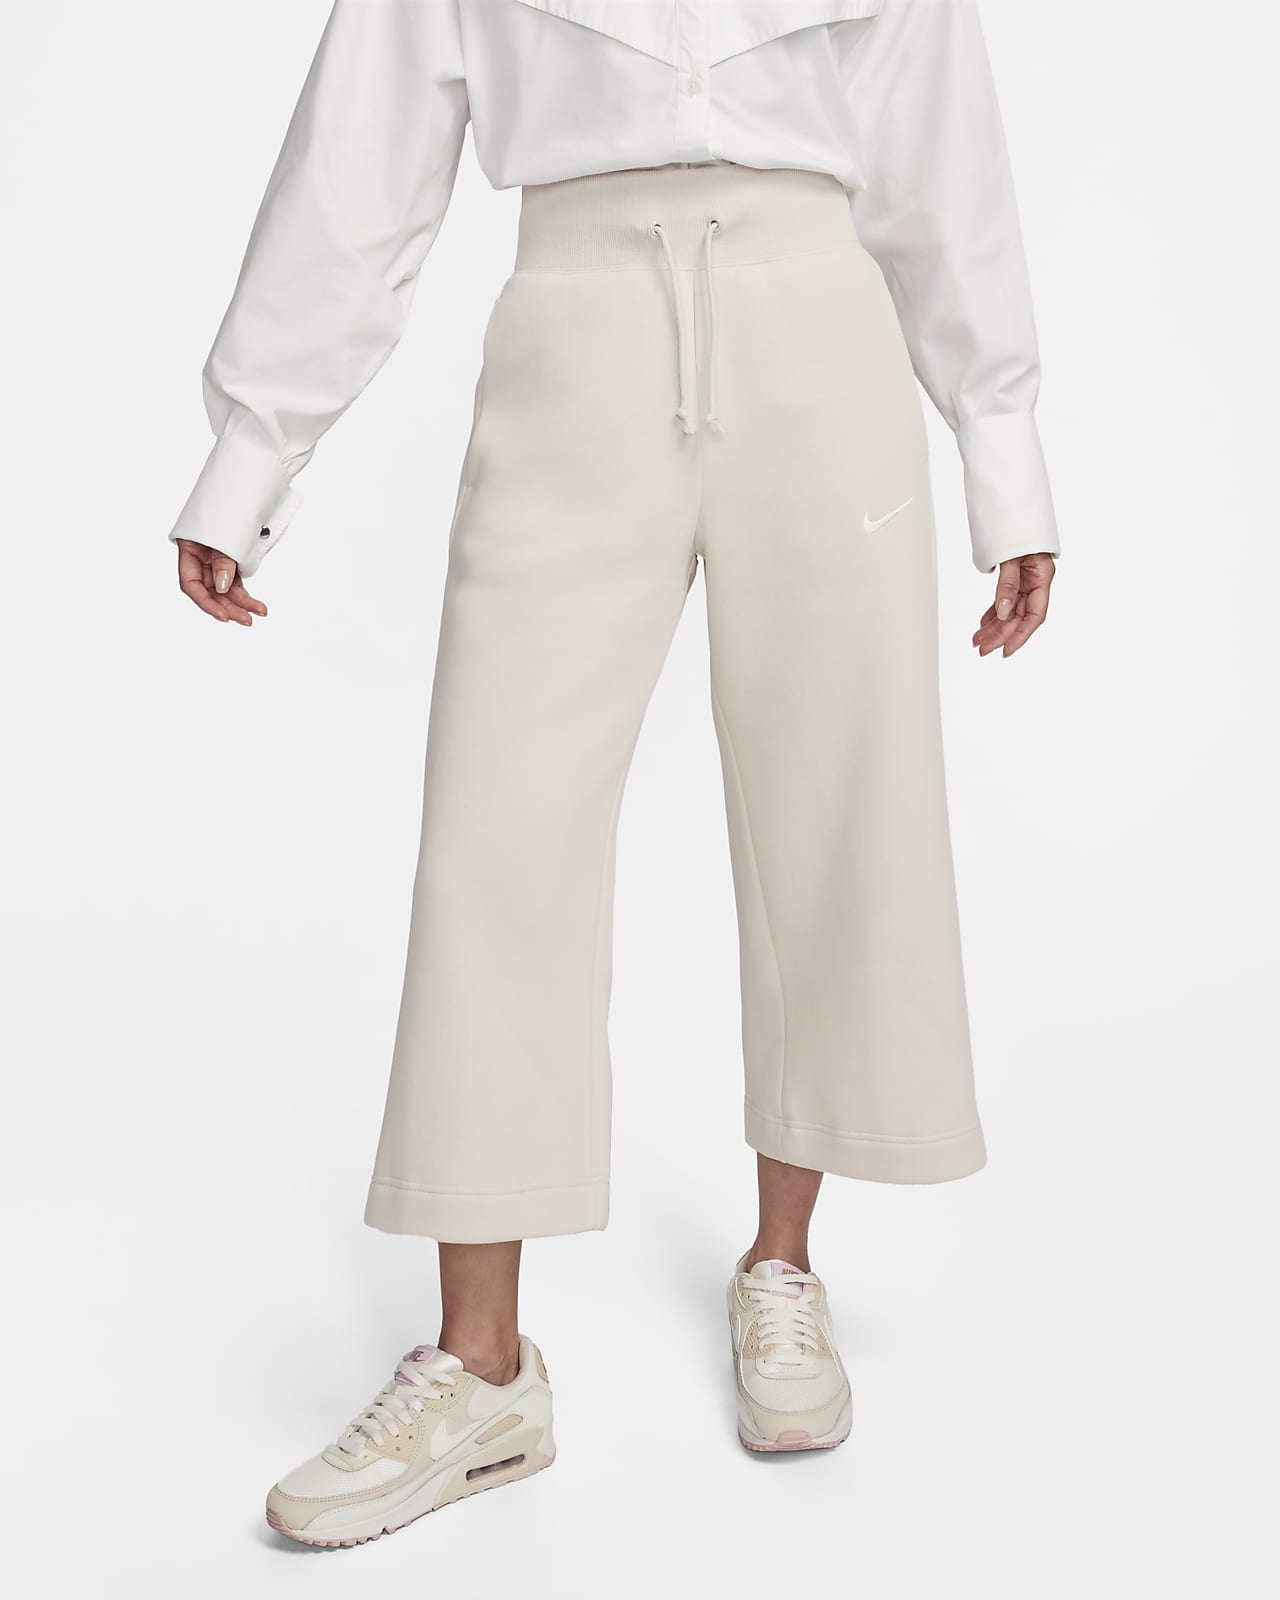 Petite Cropped Stretch Trousers in White | Roman UK